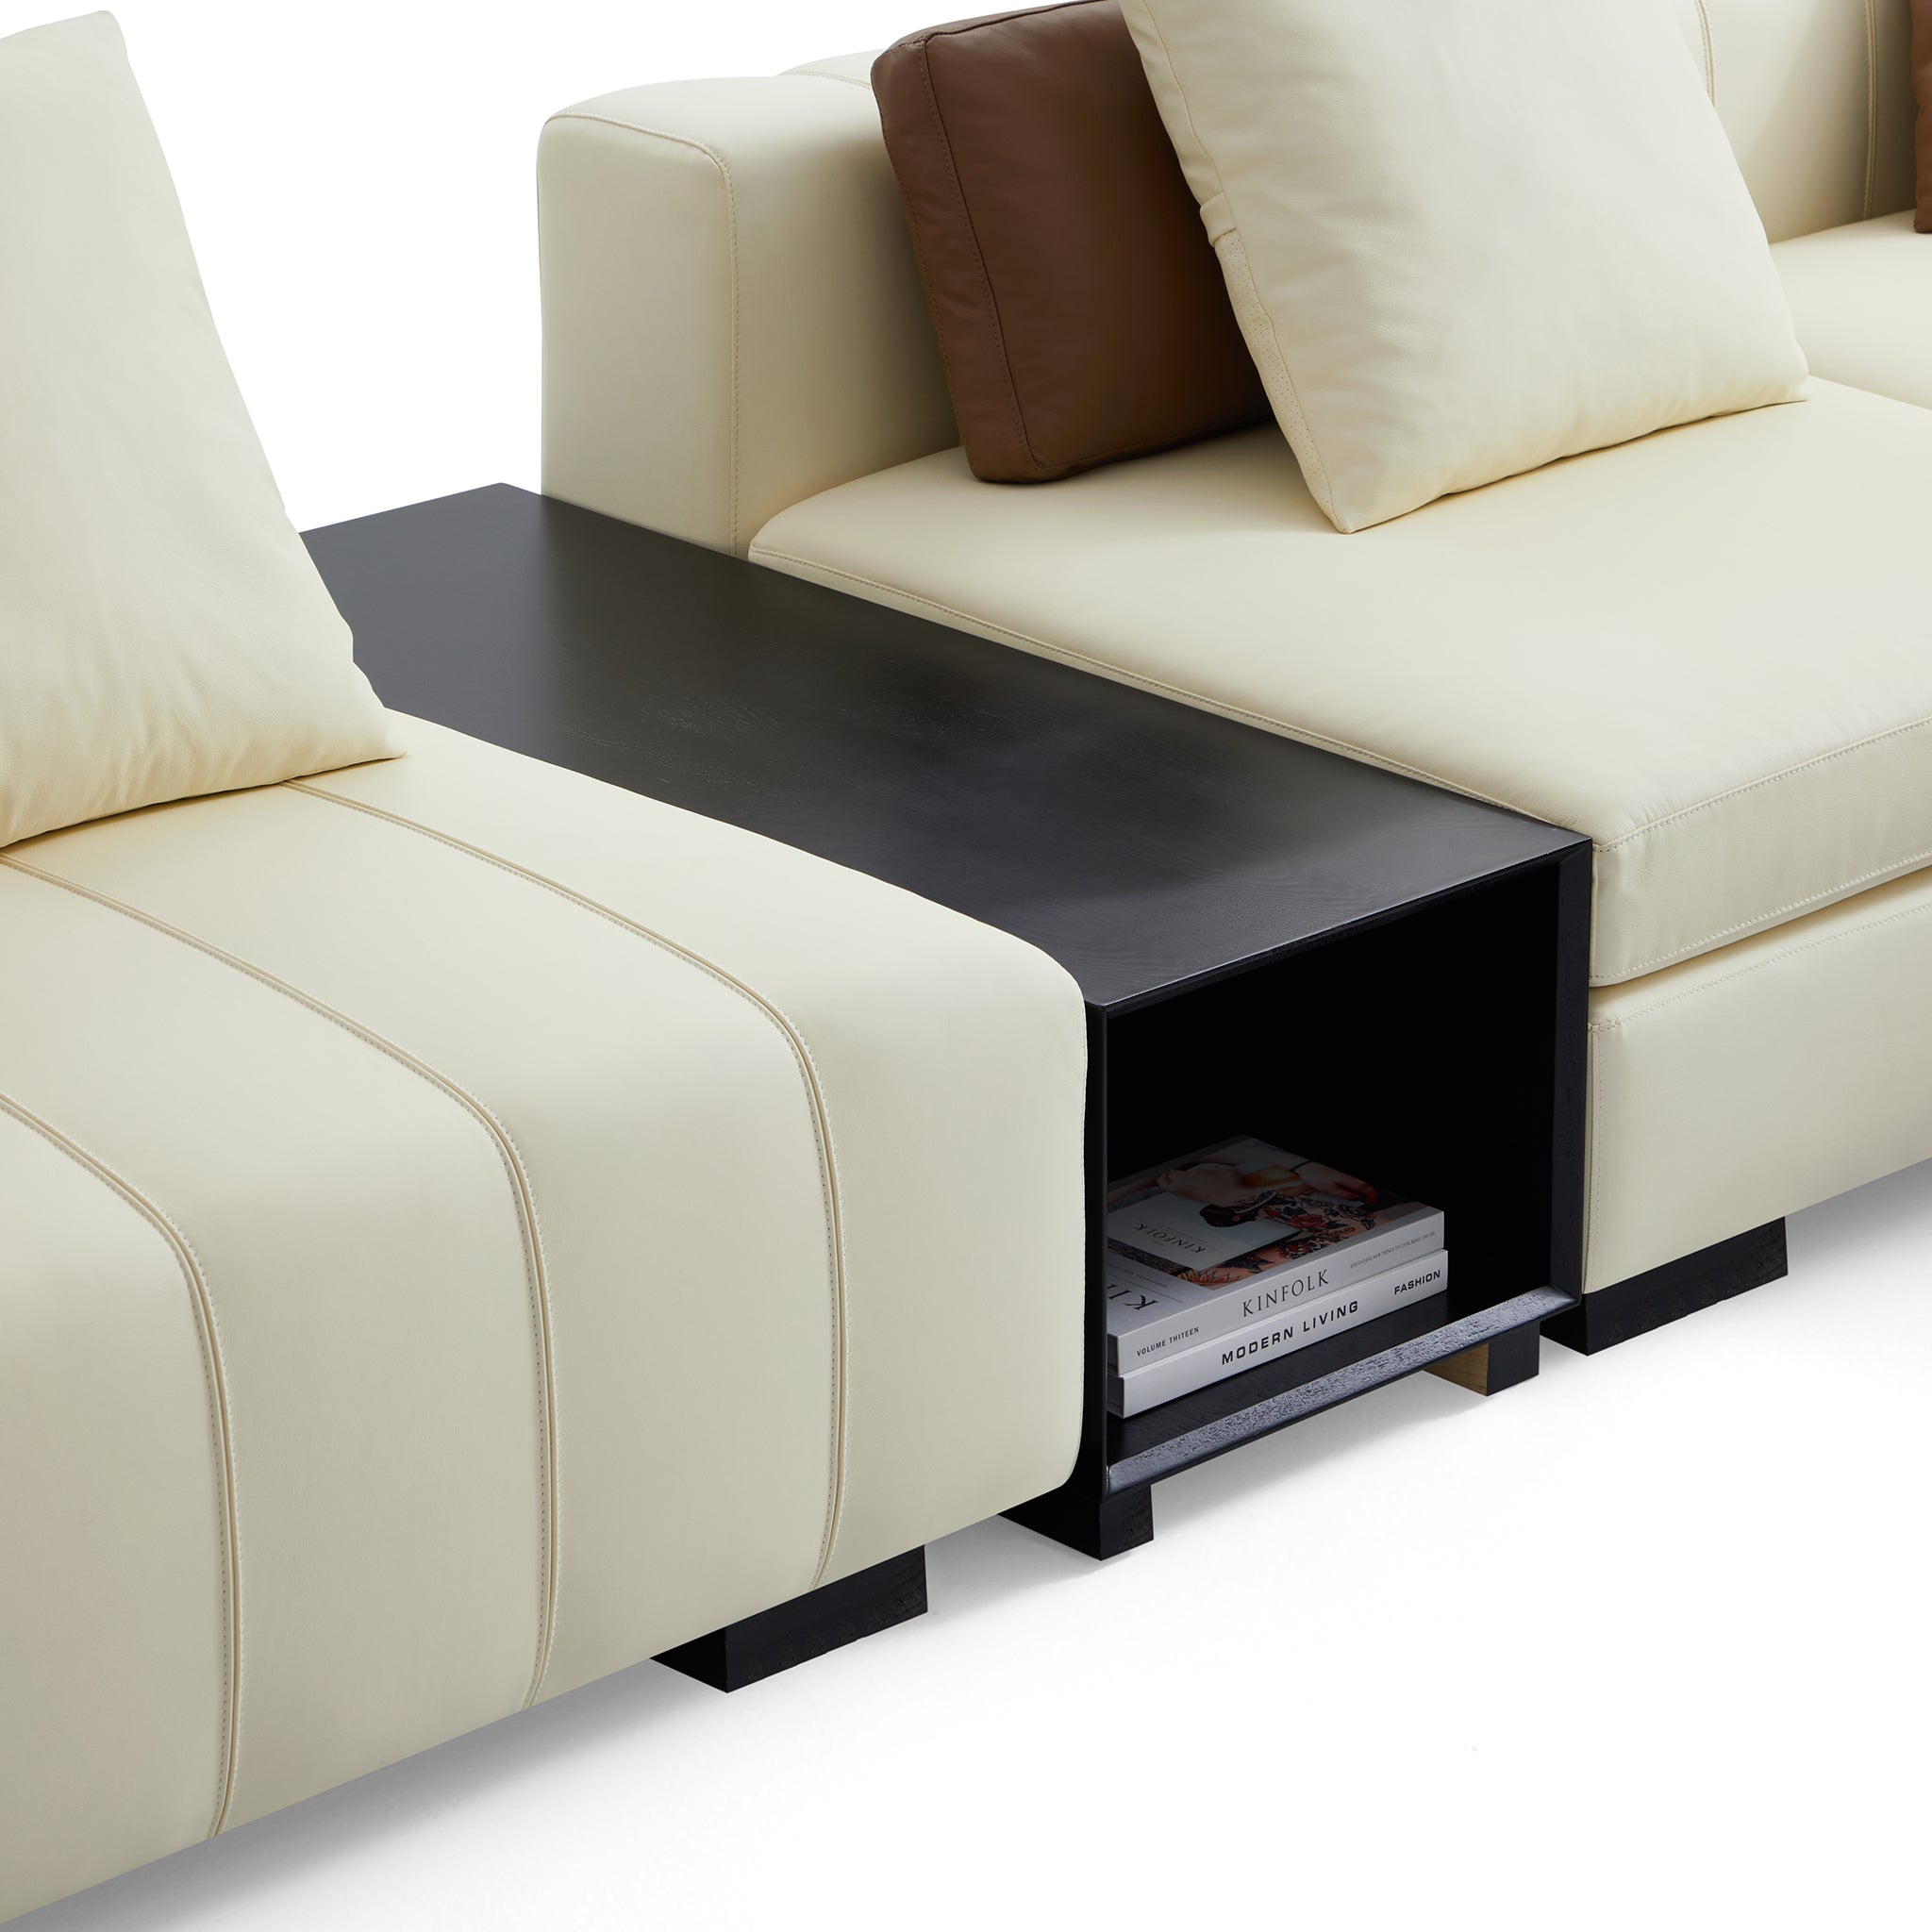 Piano L-Shaped Leather Sectional Sofa with Coffee Table